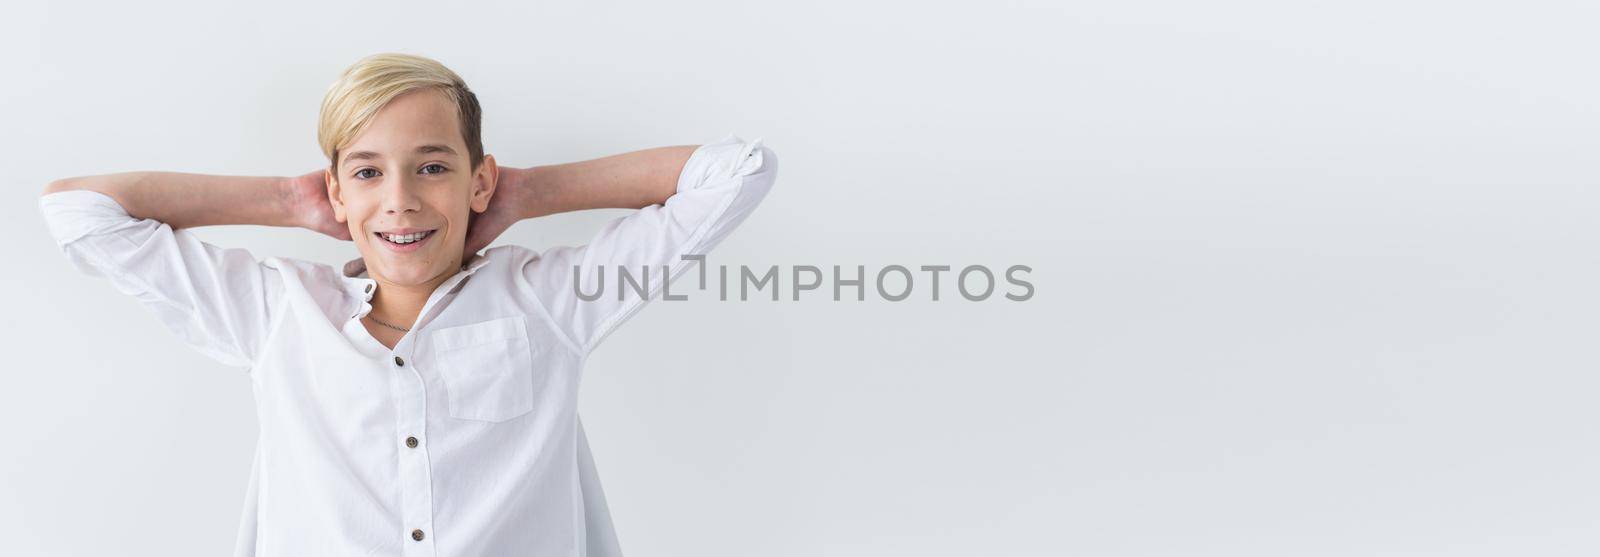 Teen boy happy and smiling with braces on teeth - ortodont dentistry and dental health on white background with copy space banner and place for advertising by Satura86